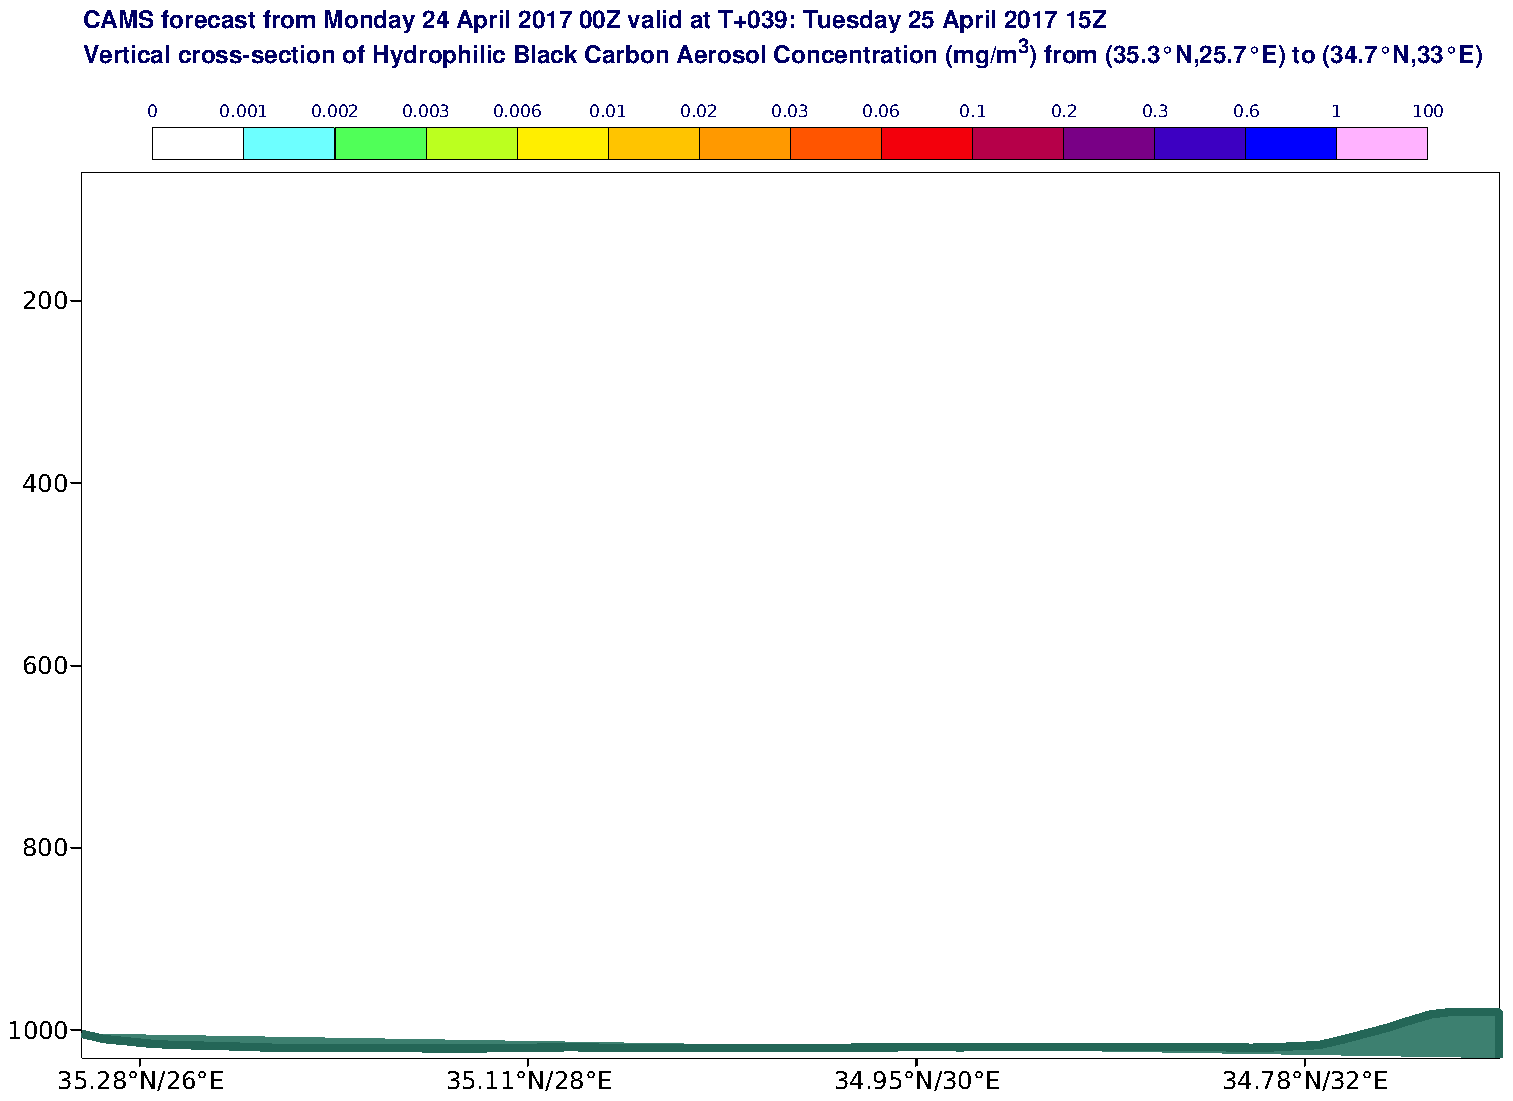 Vertical cross-section of Hydrophilic Black Carbon Aerosol Concentration (mg/m3) valid at T39 - 2017-04-25 15:00